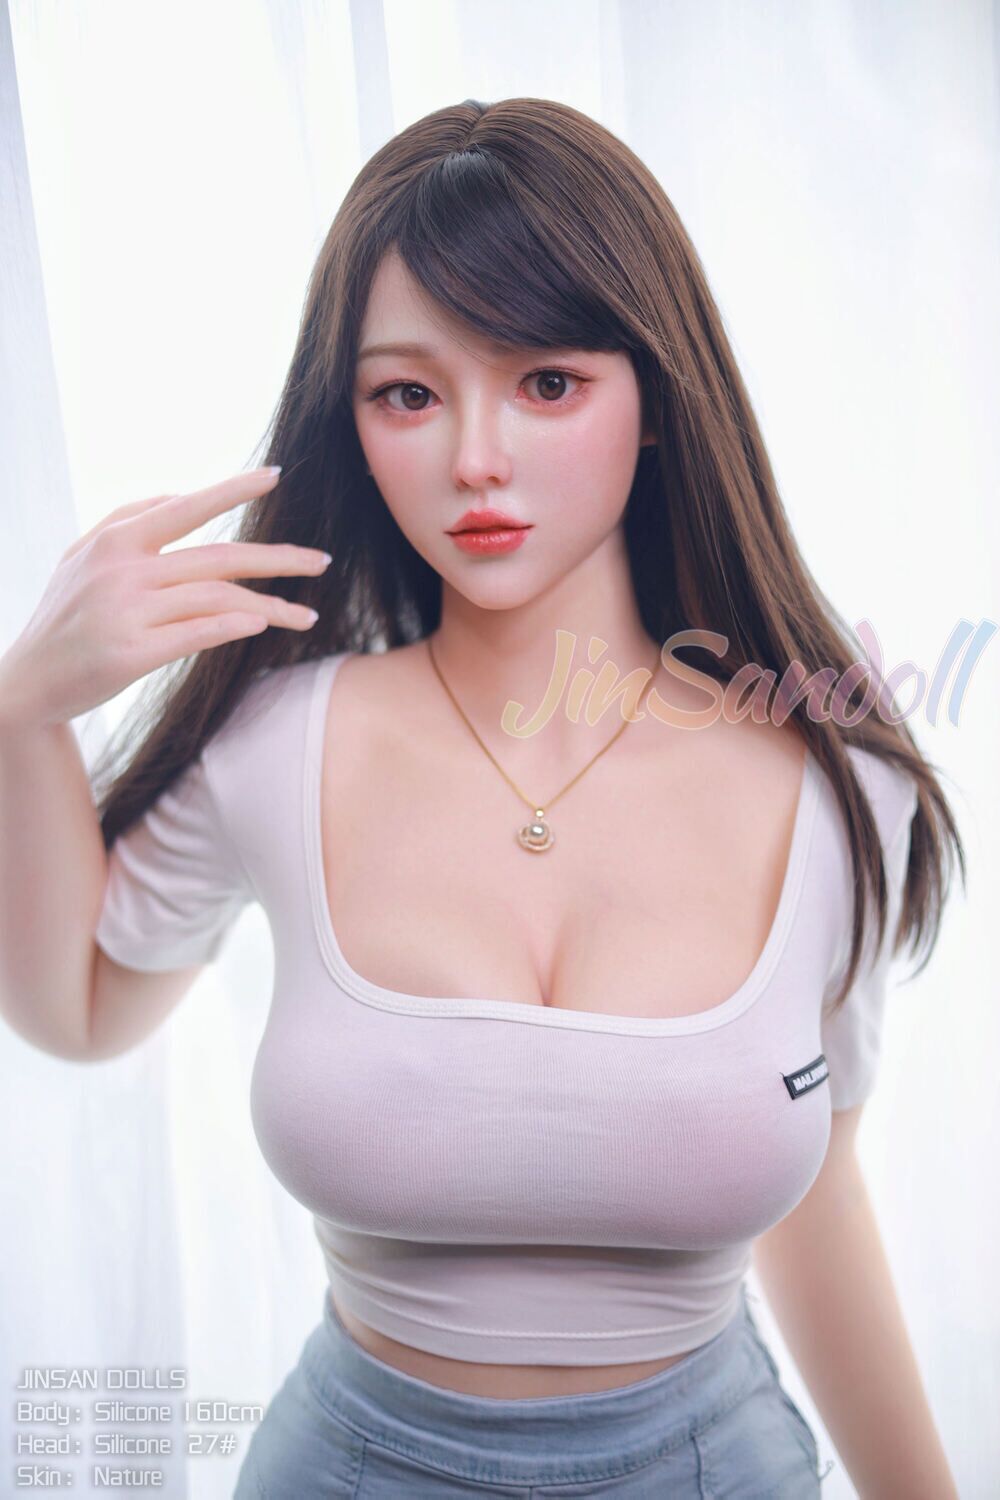 wmdoll160cm5ft3 D-Cup Silikon Sex Puppe - Tracy Judd bei rosemarydoll